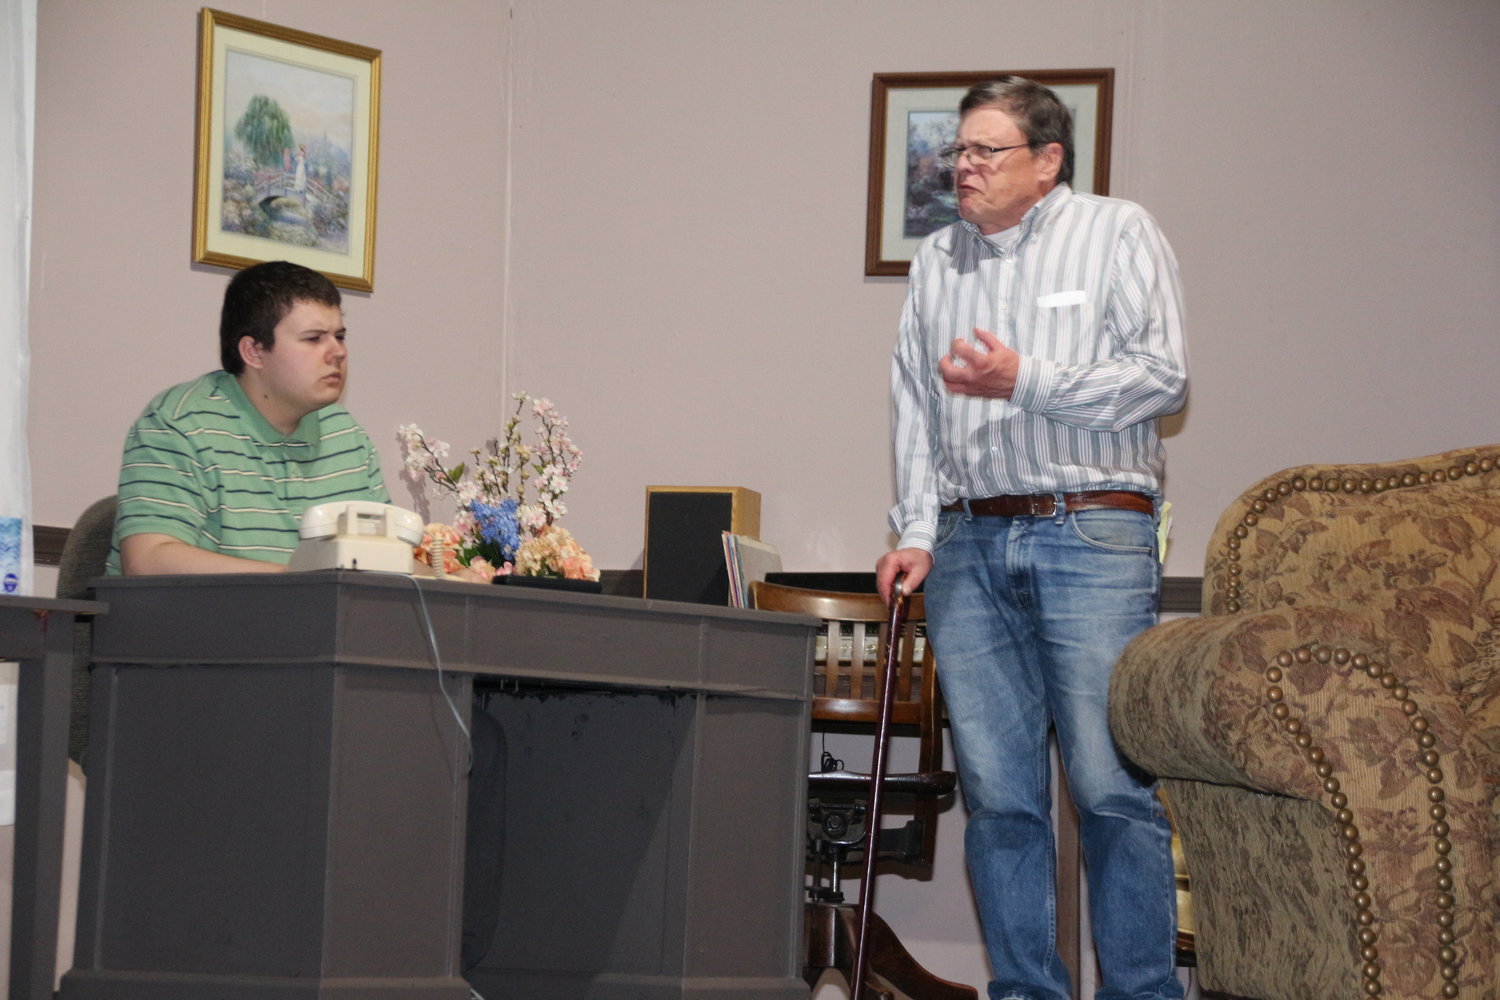 Joshua Thompson (Jack) and Mike Cosgrove (Neil) in a scene from "Geezers."